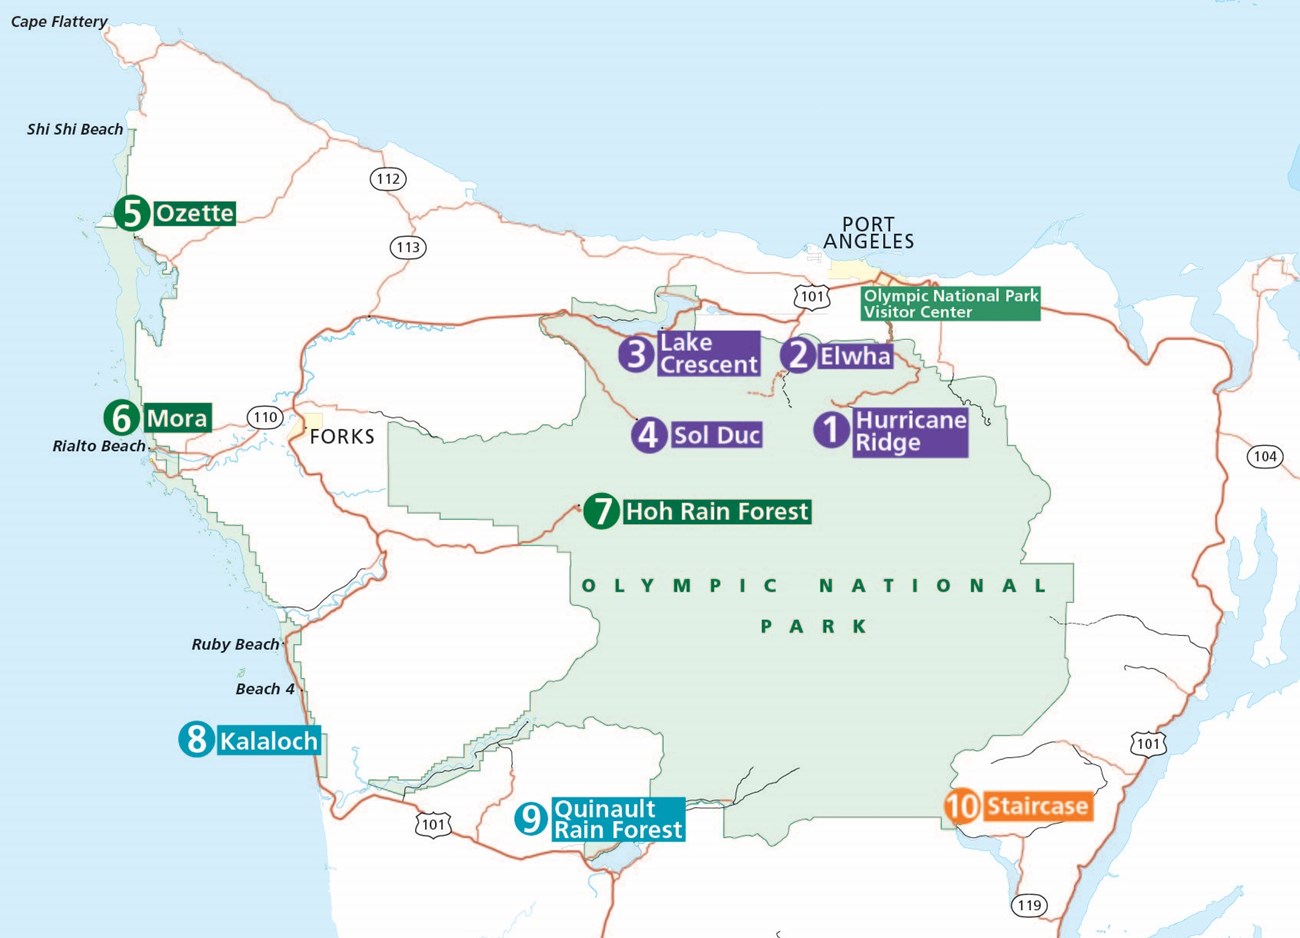 A map of Olympic National Park with the top destinations numbered and labeled.